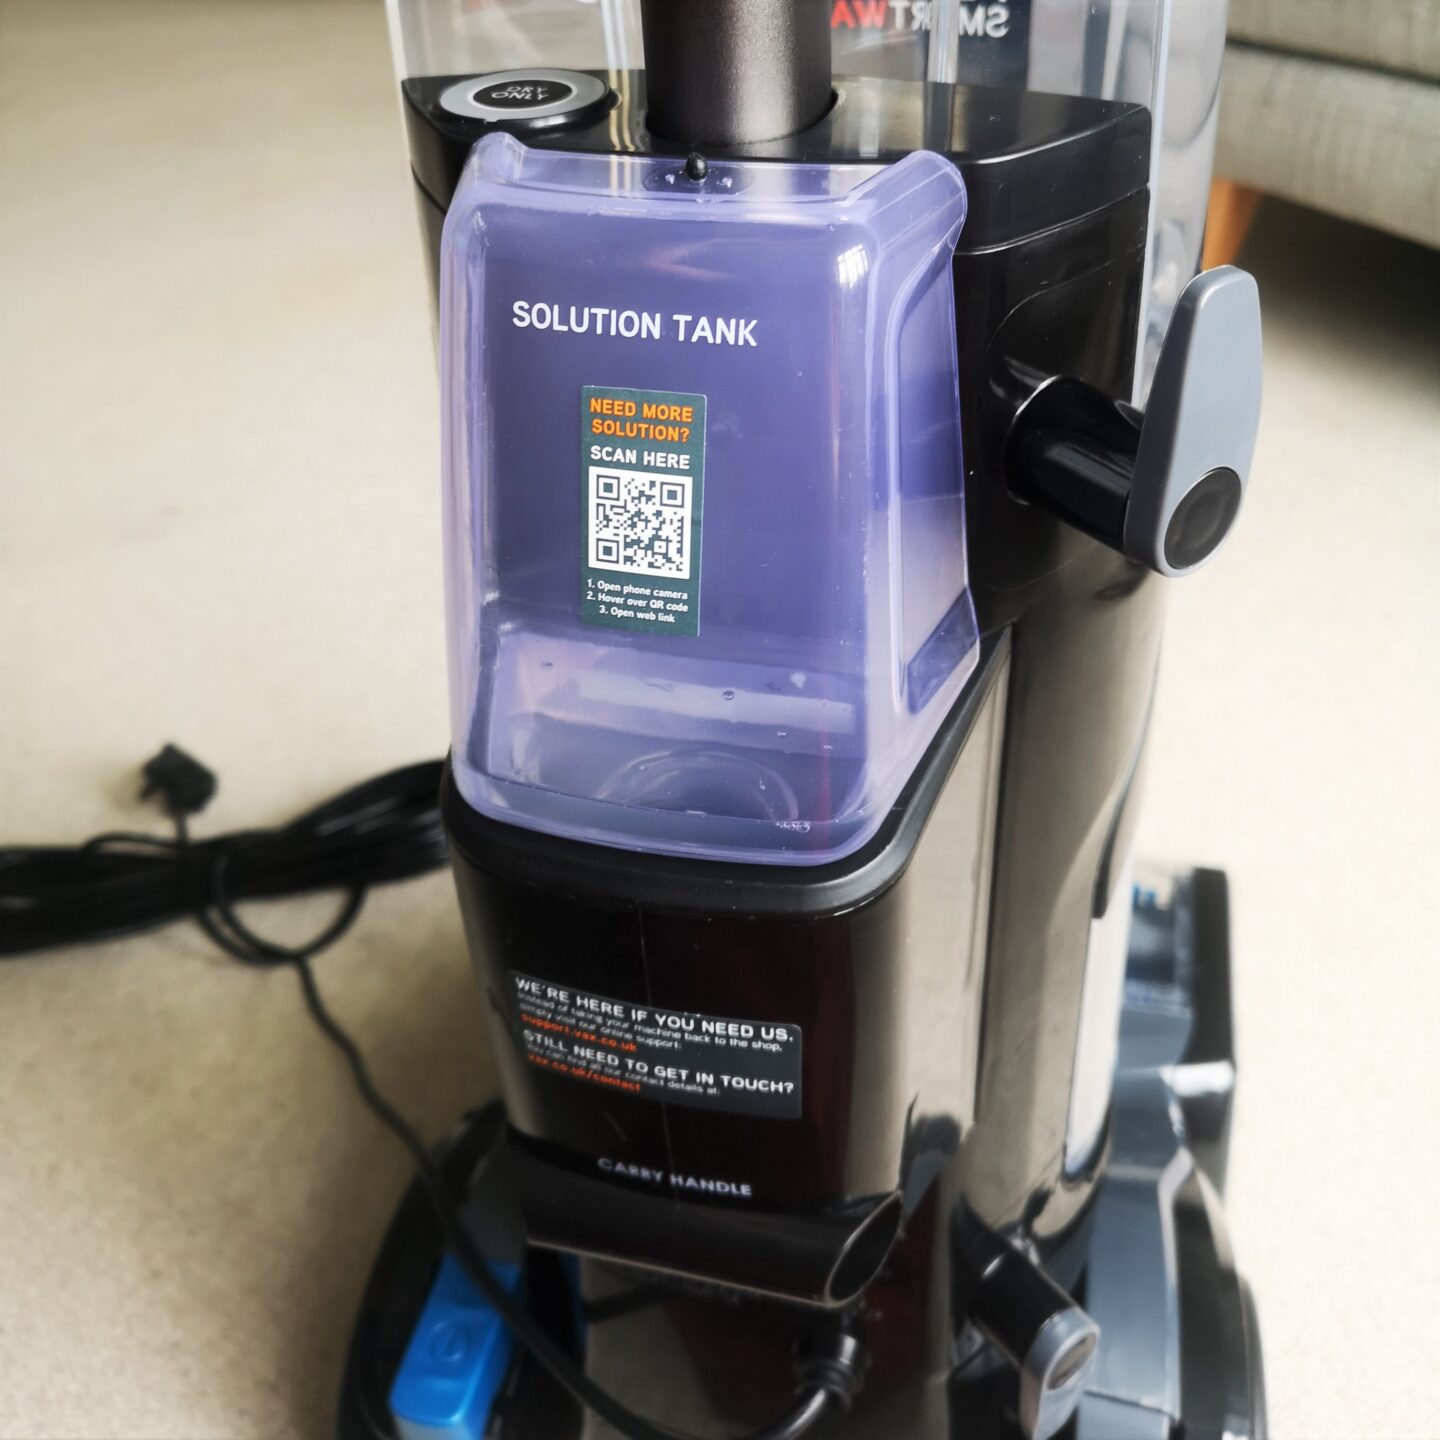 Vax Platinum SmartWash Carpet Cleaner Review, Vax, Carpet Cleaner, Home Appliances, Review, Motion Sense Technology, Carpet Cleaning, Home & Garden, The Frenchie Mummy, Vax Platinum SmartWash, Carpet Cleaner